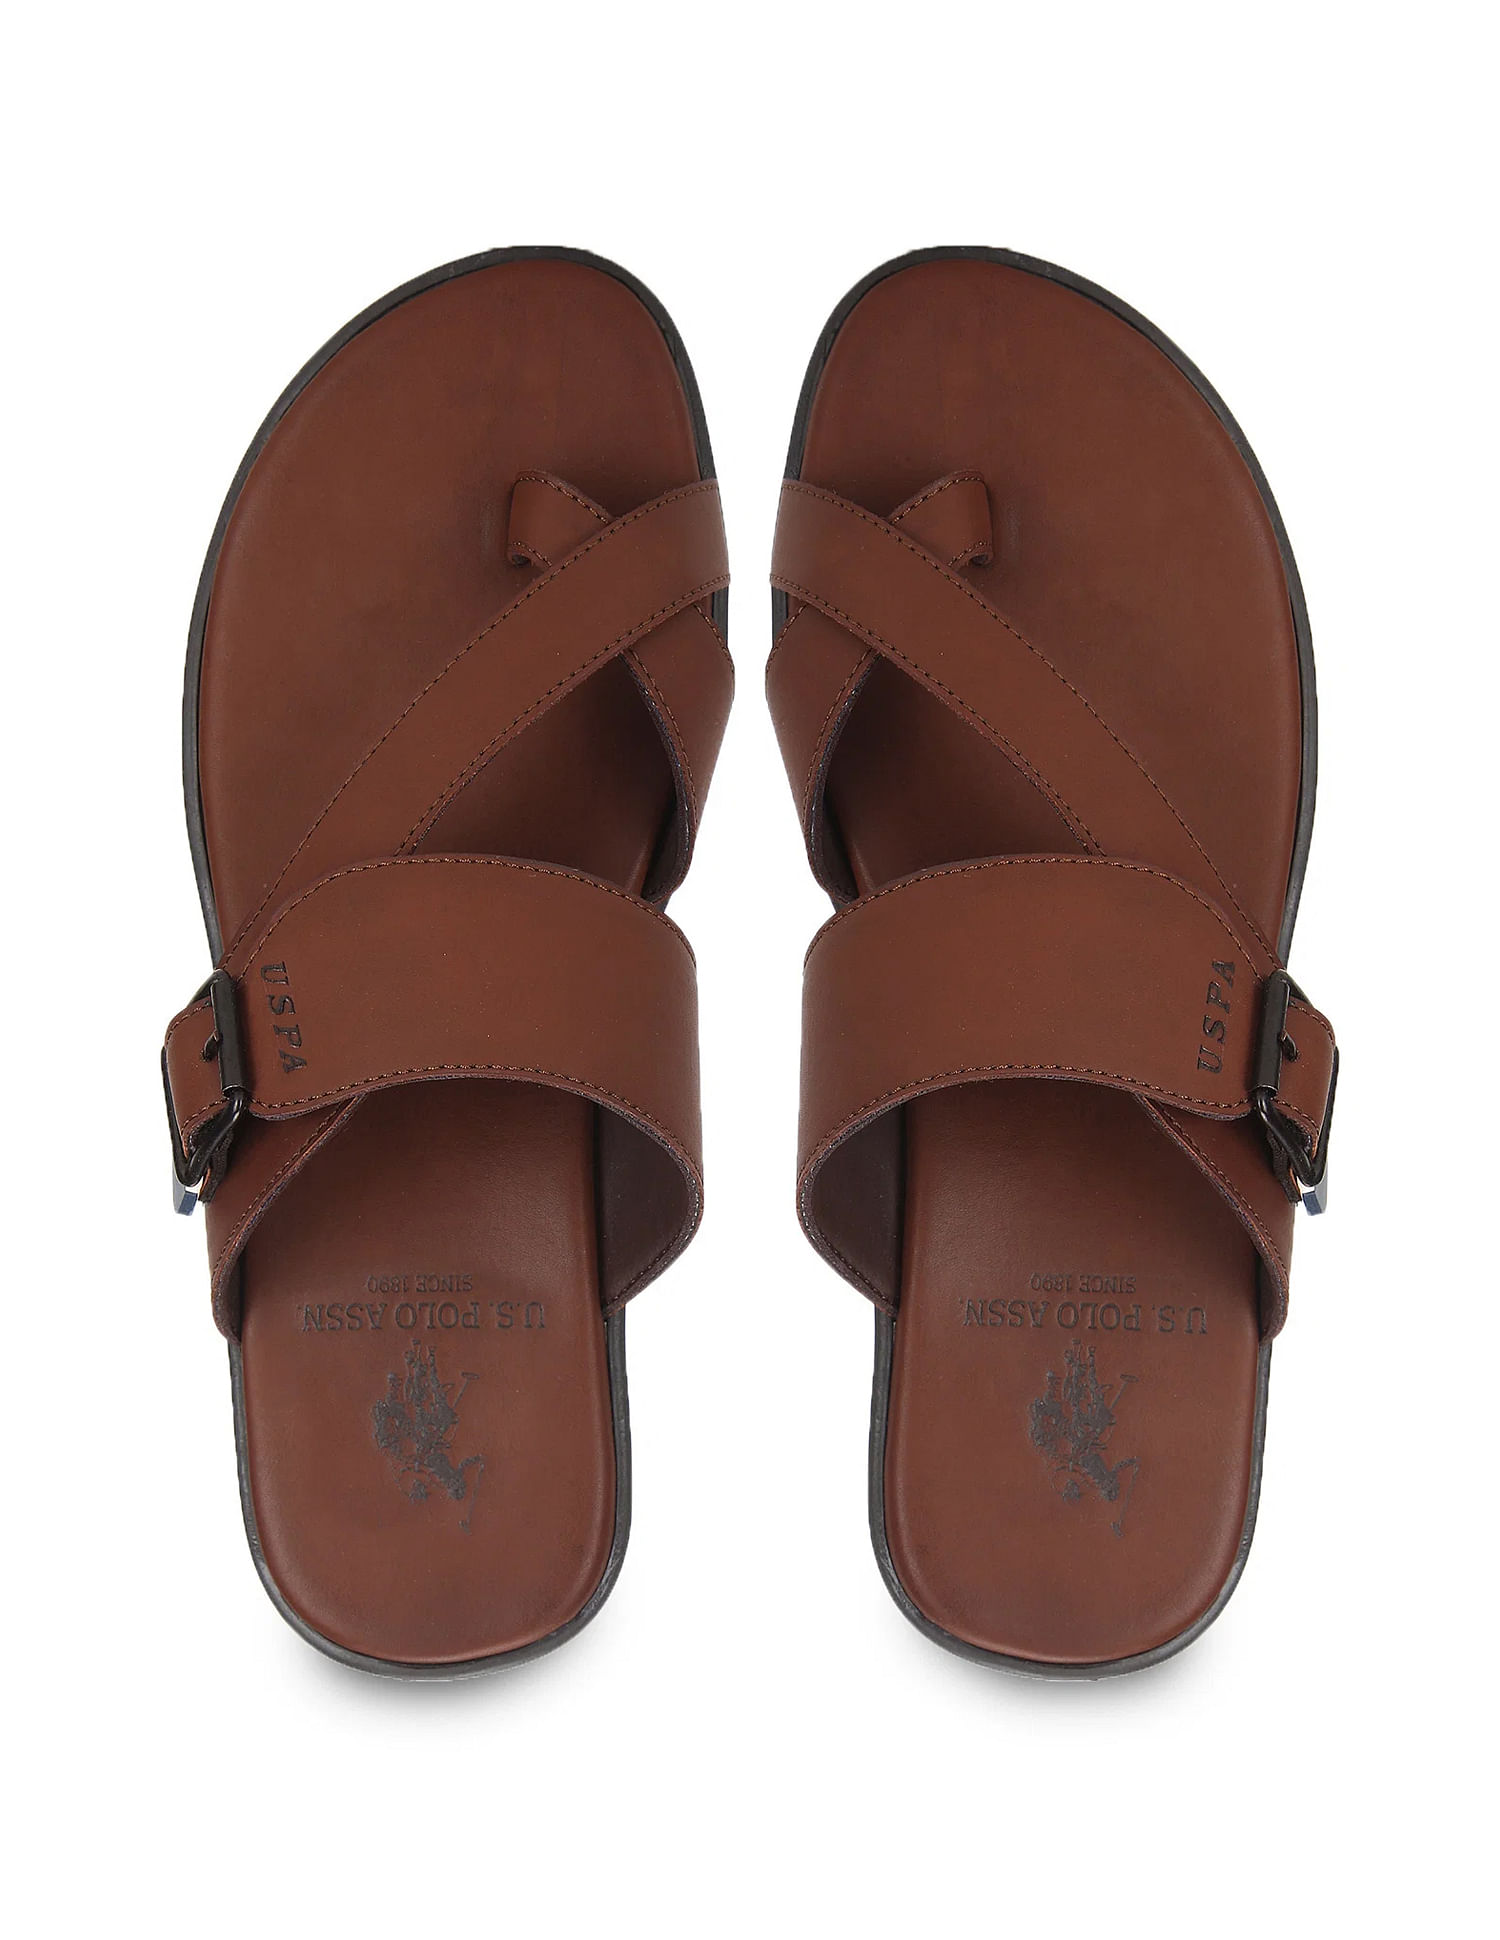 FEATHER LEATHER Men's Genuine Leather Comfortable & Fashionable Sandals &  Slippers | Casual Indoor/Outdoor/Chappal | Flat Flip Flops Slippers With  Strap